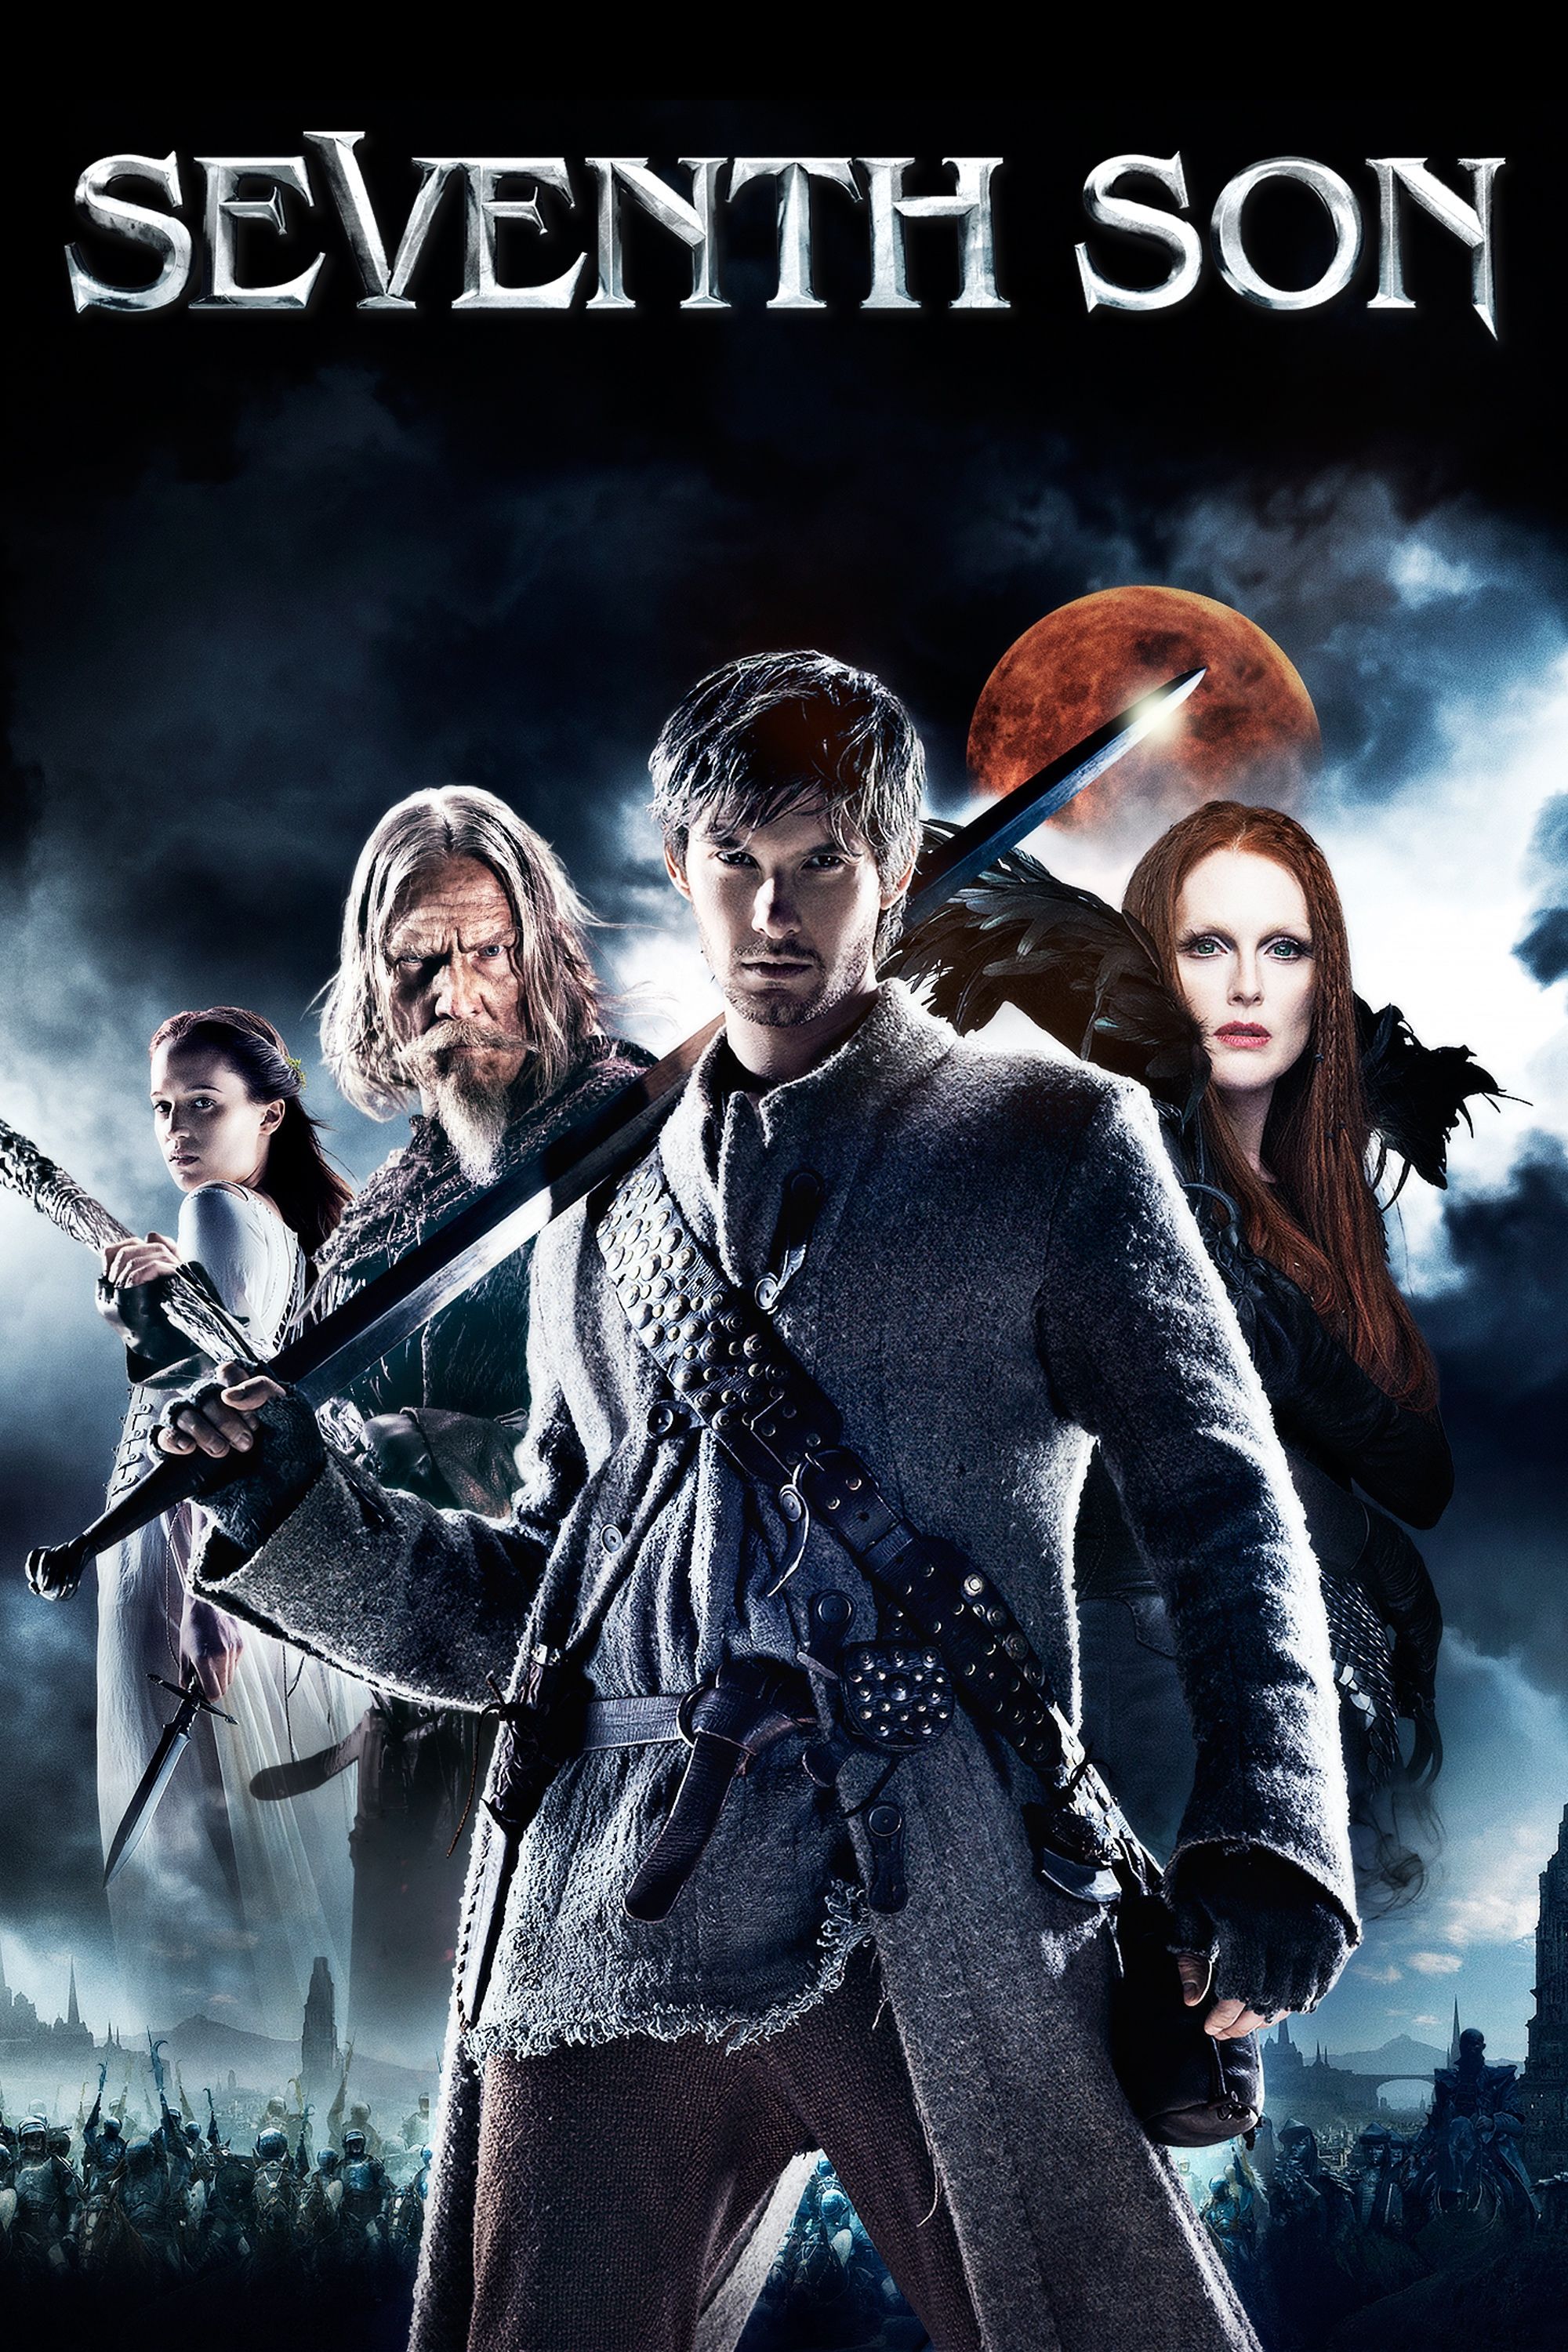 Seventh son movie download in tamil